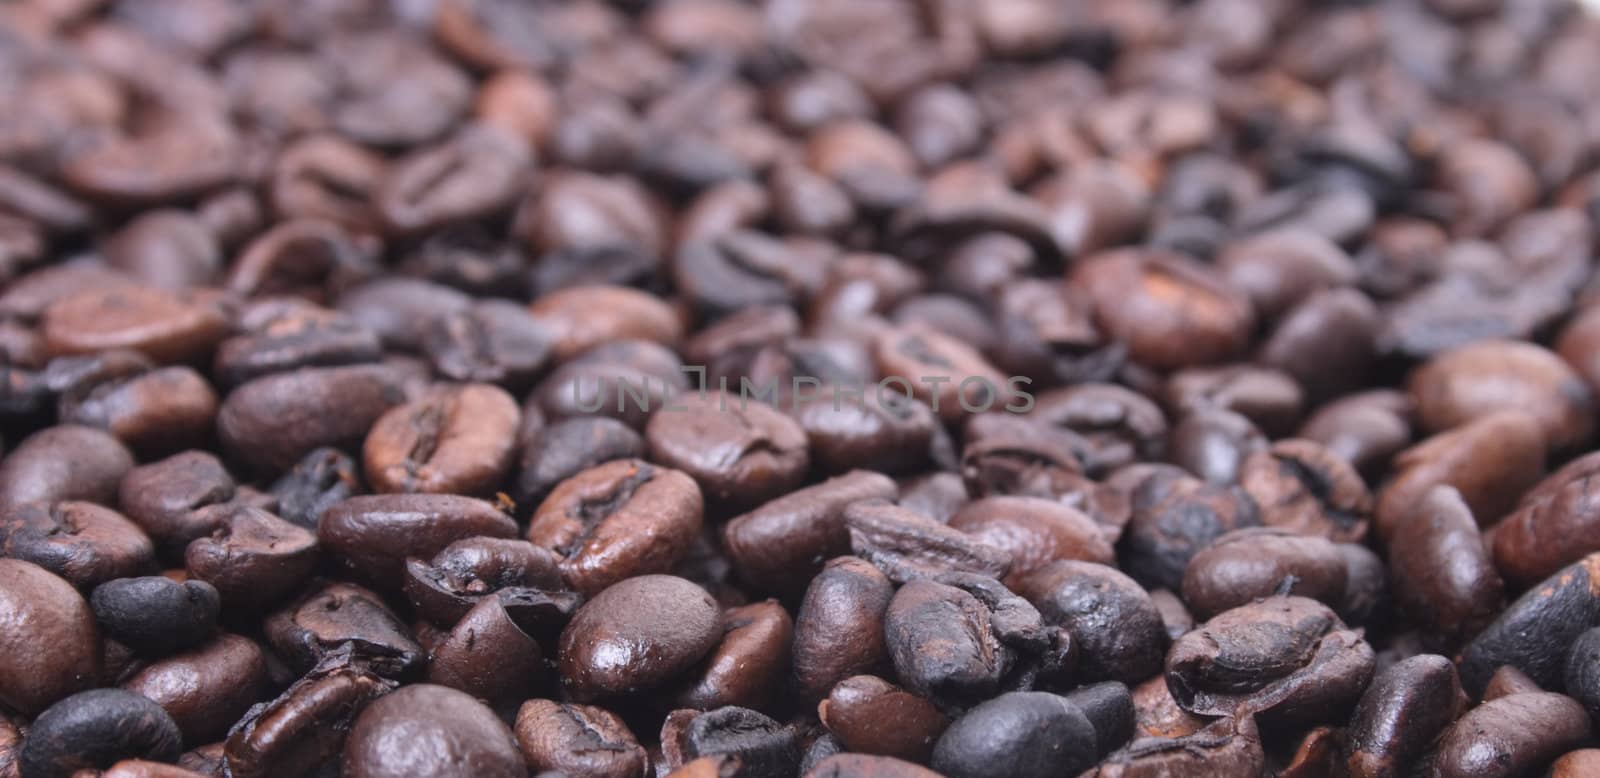 fresh natural coffea background from the  coffea seeds